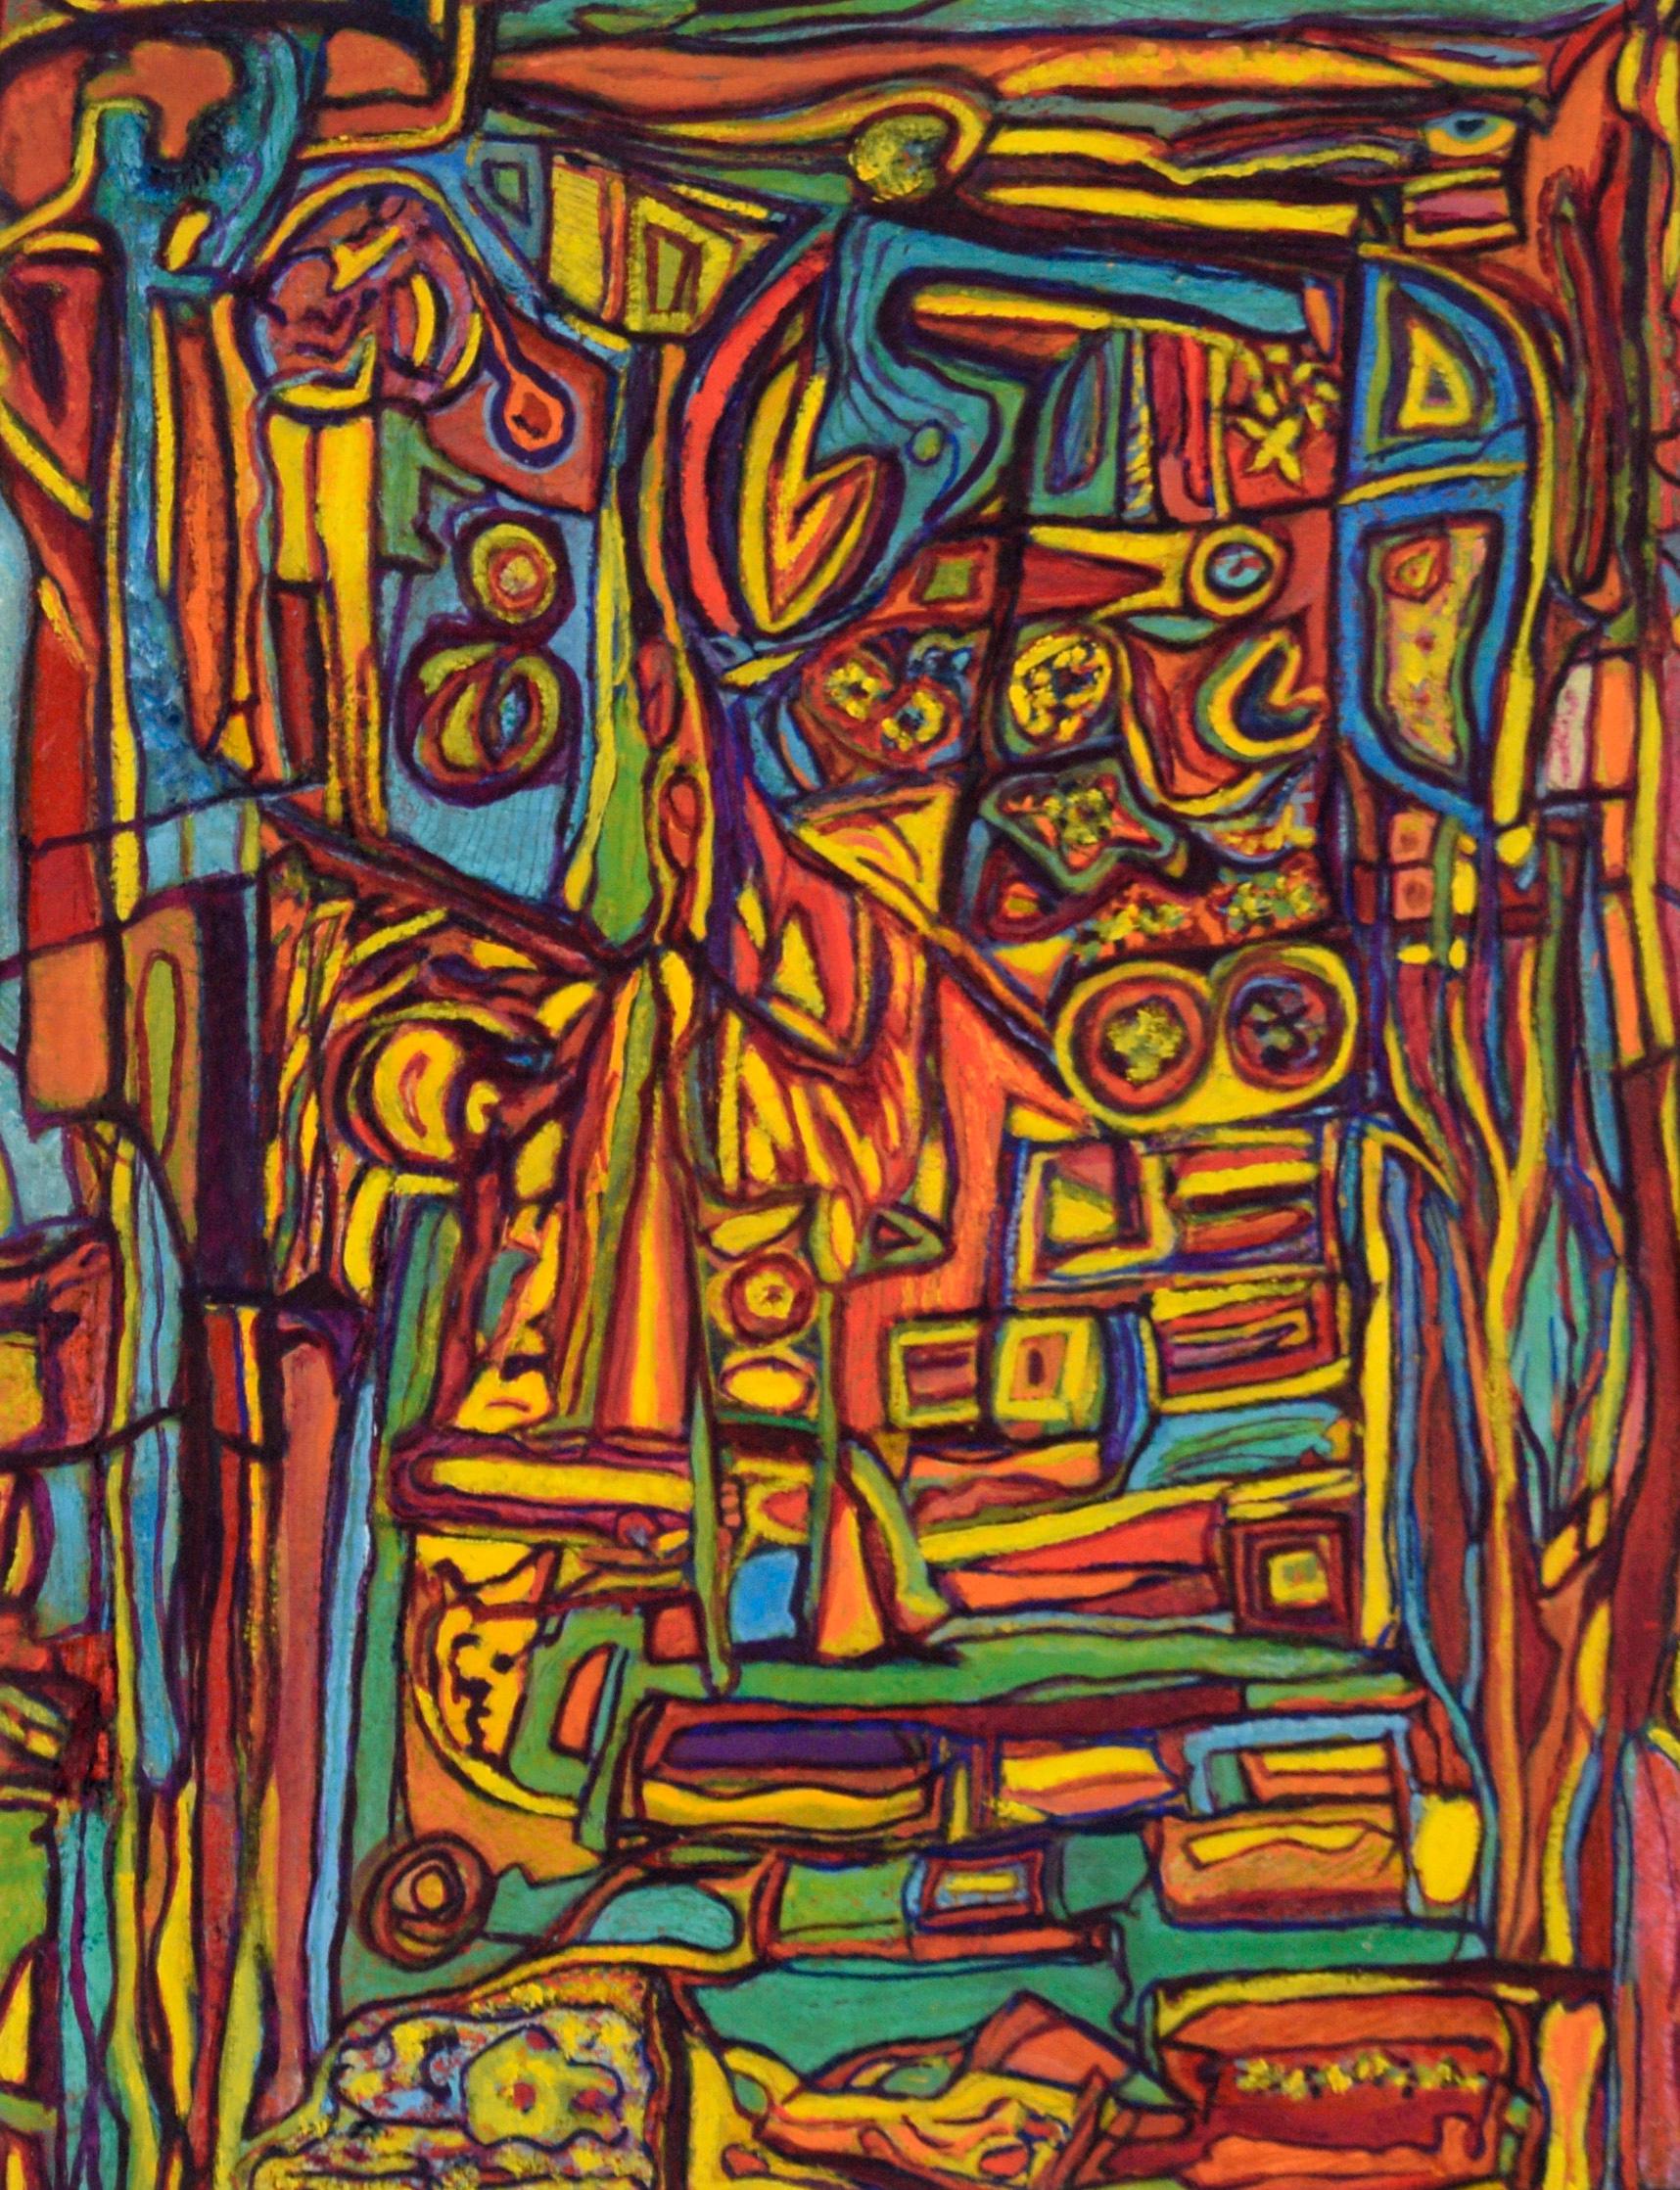 Psychedelic Abstract in Yellow, Teal, and Orange - Oil on Paper - Painting by Jennie Rafton